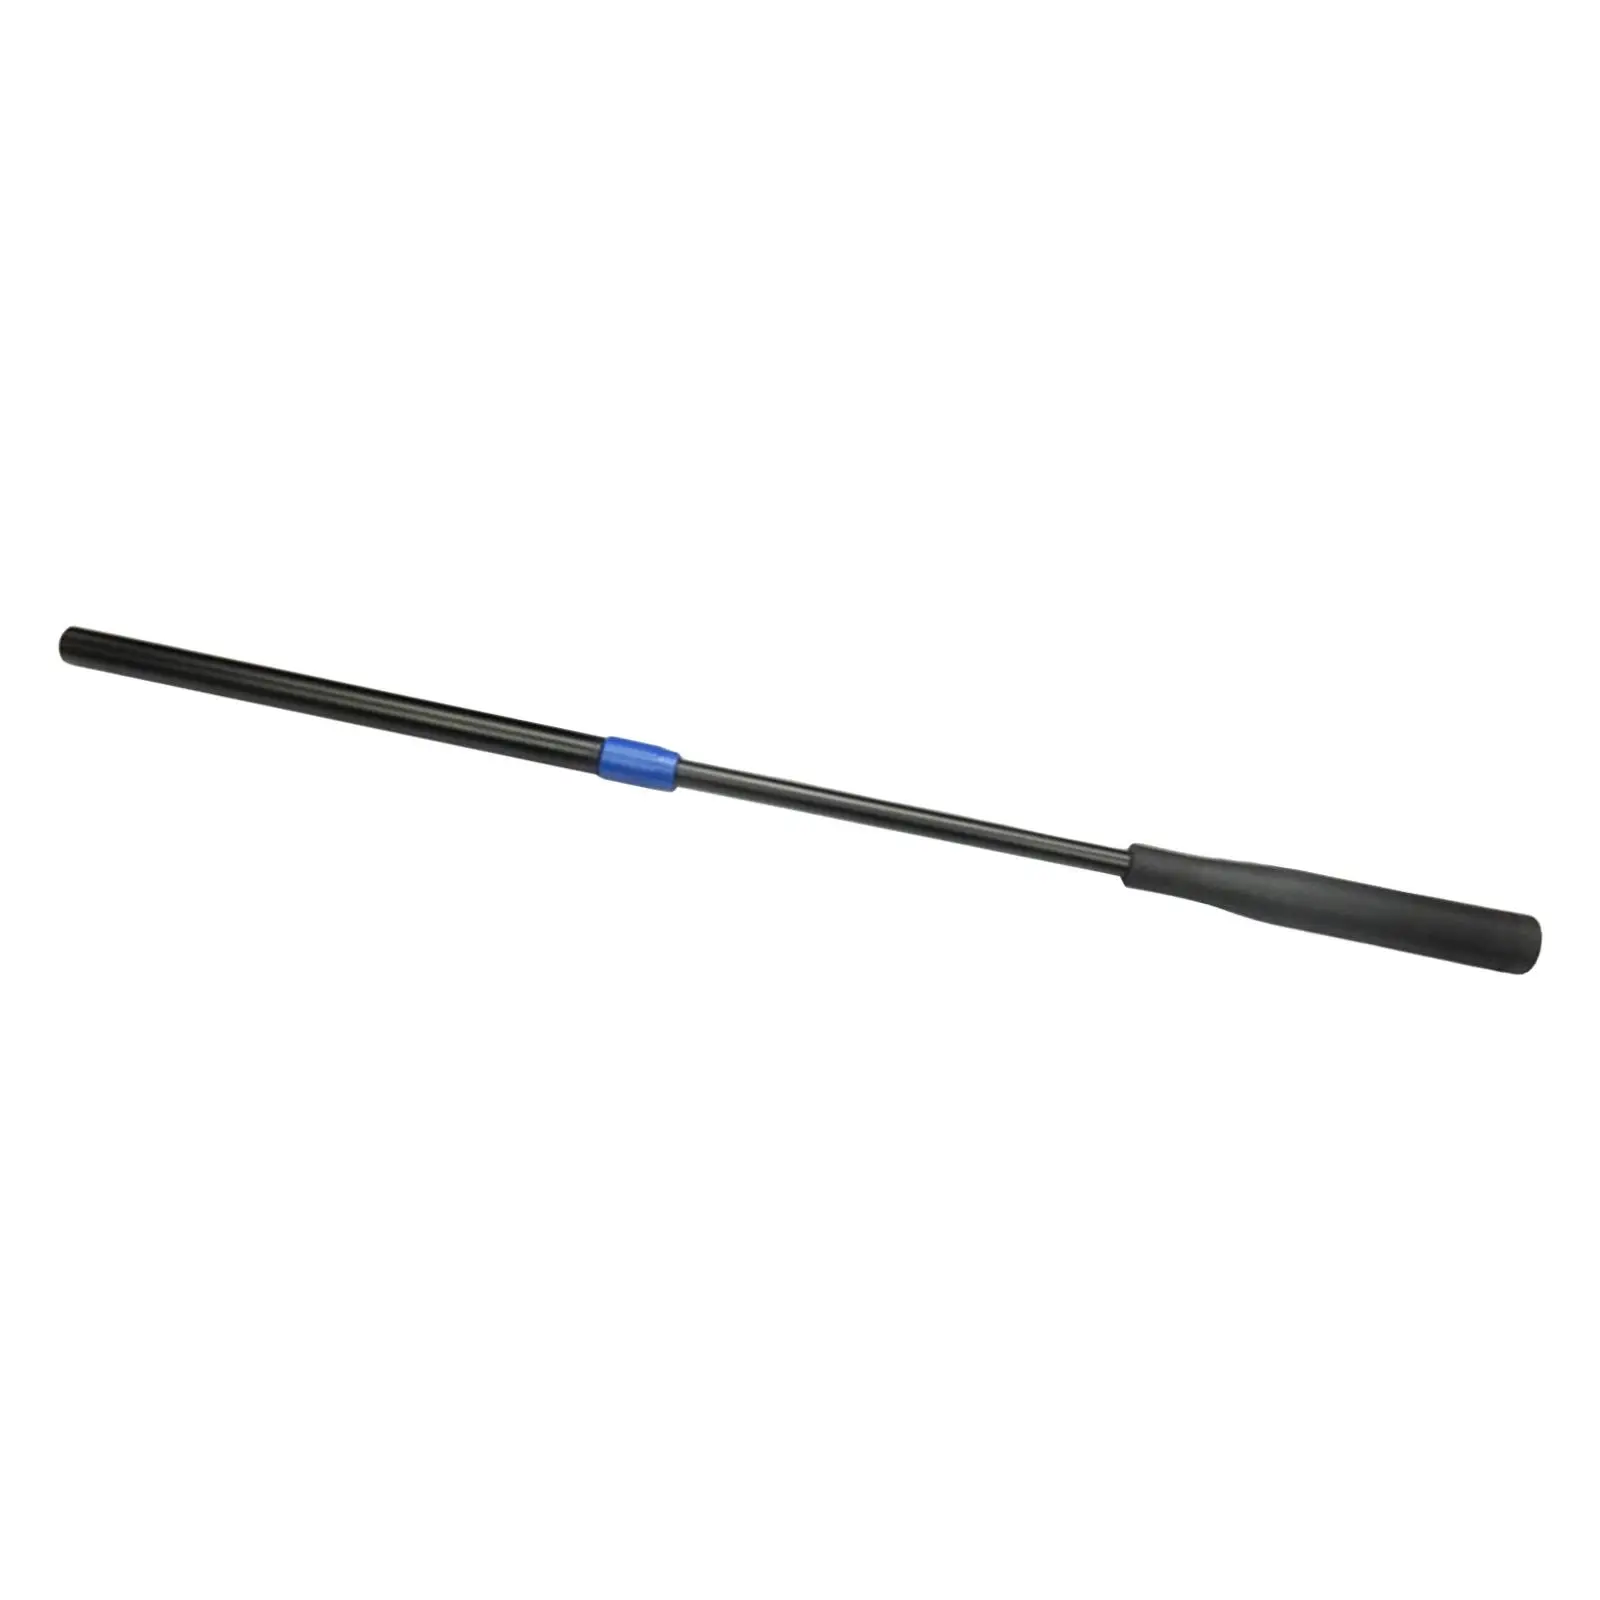 9 Balls Telescopic Pool Cue Butt End Extension Extreme Extender Lengthener for Pool Billiard Cues Sticks Accessories